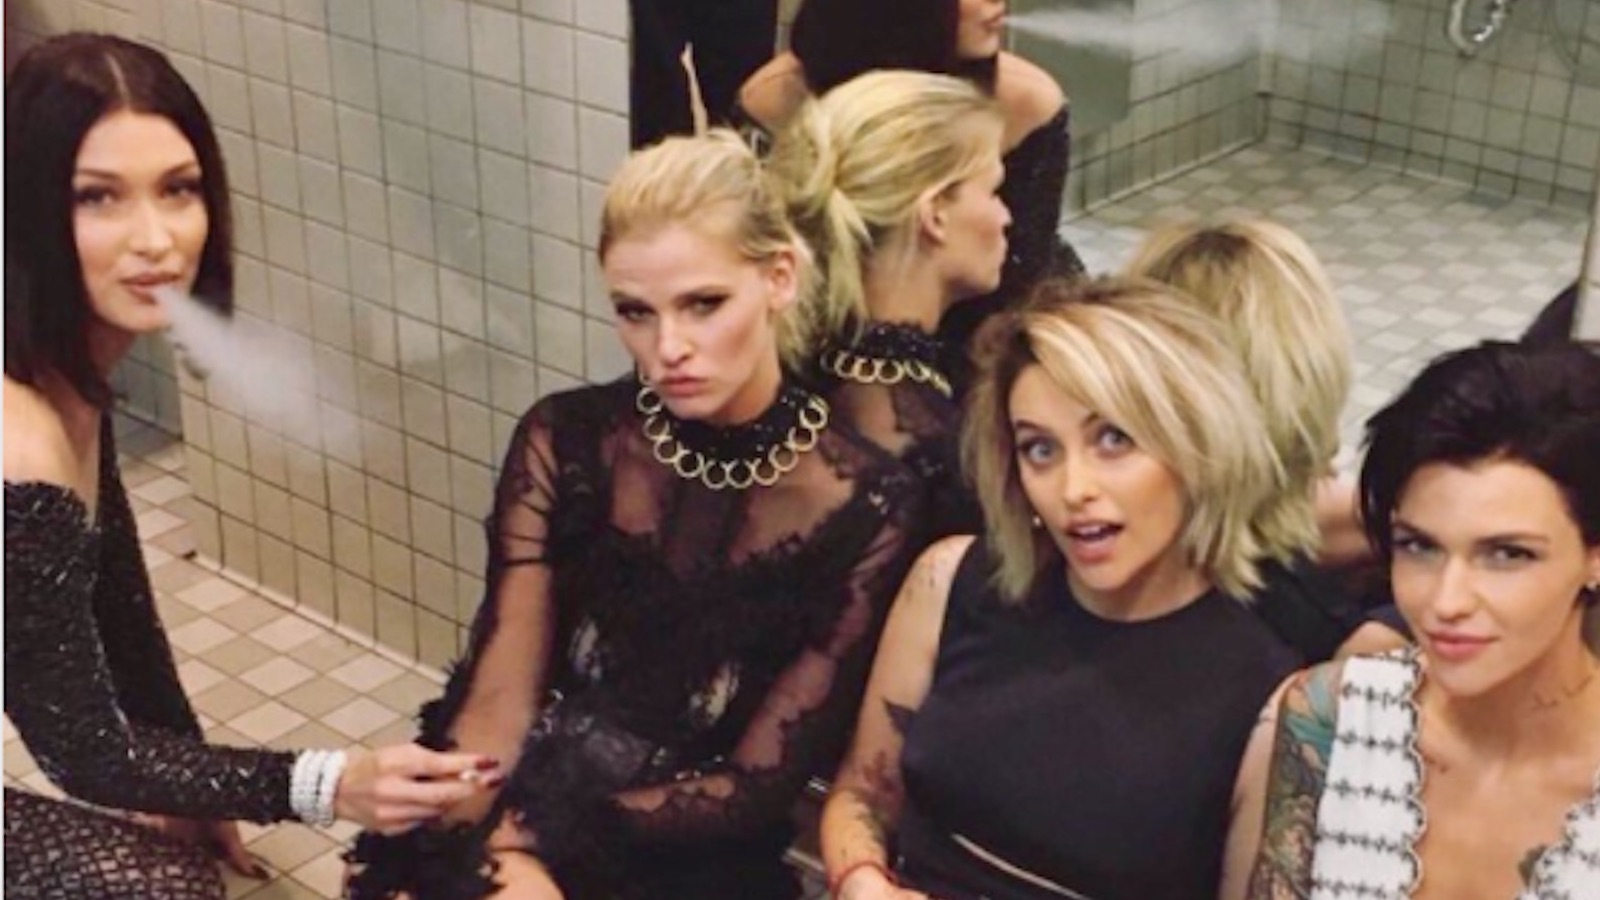 So Many Celebs Smoked Cigarettes in the Bathroom at the Met Gala